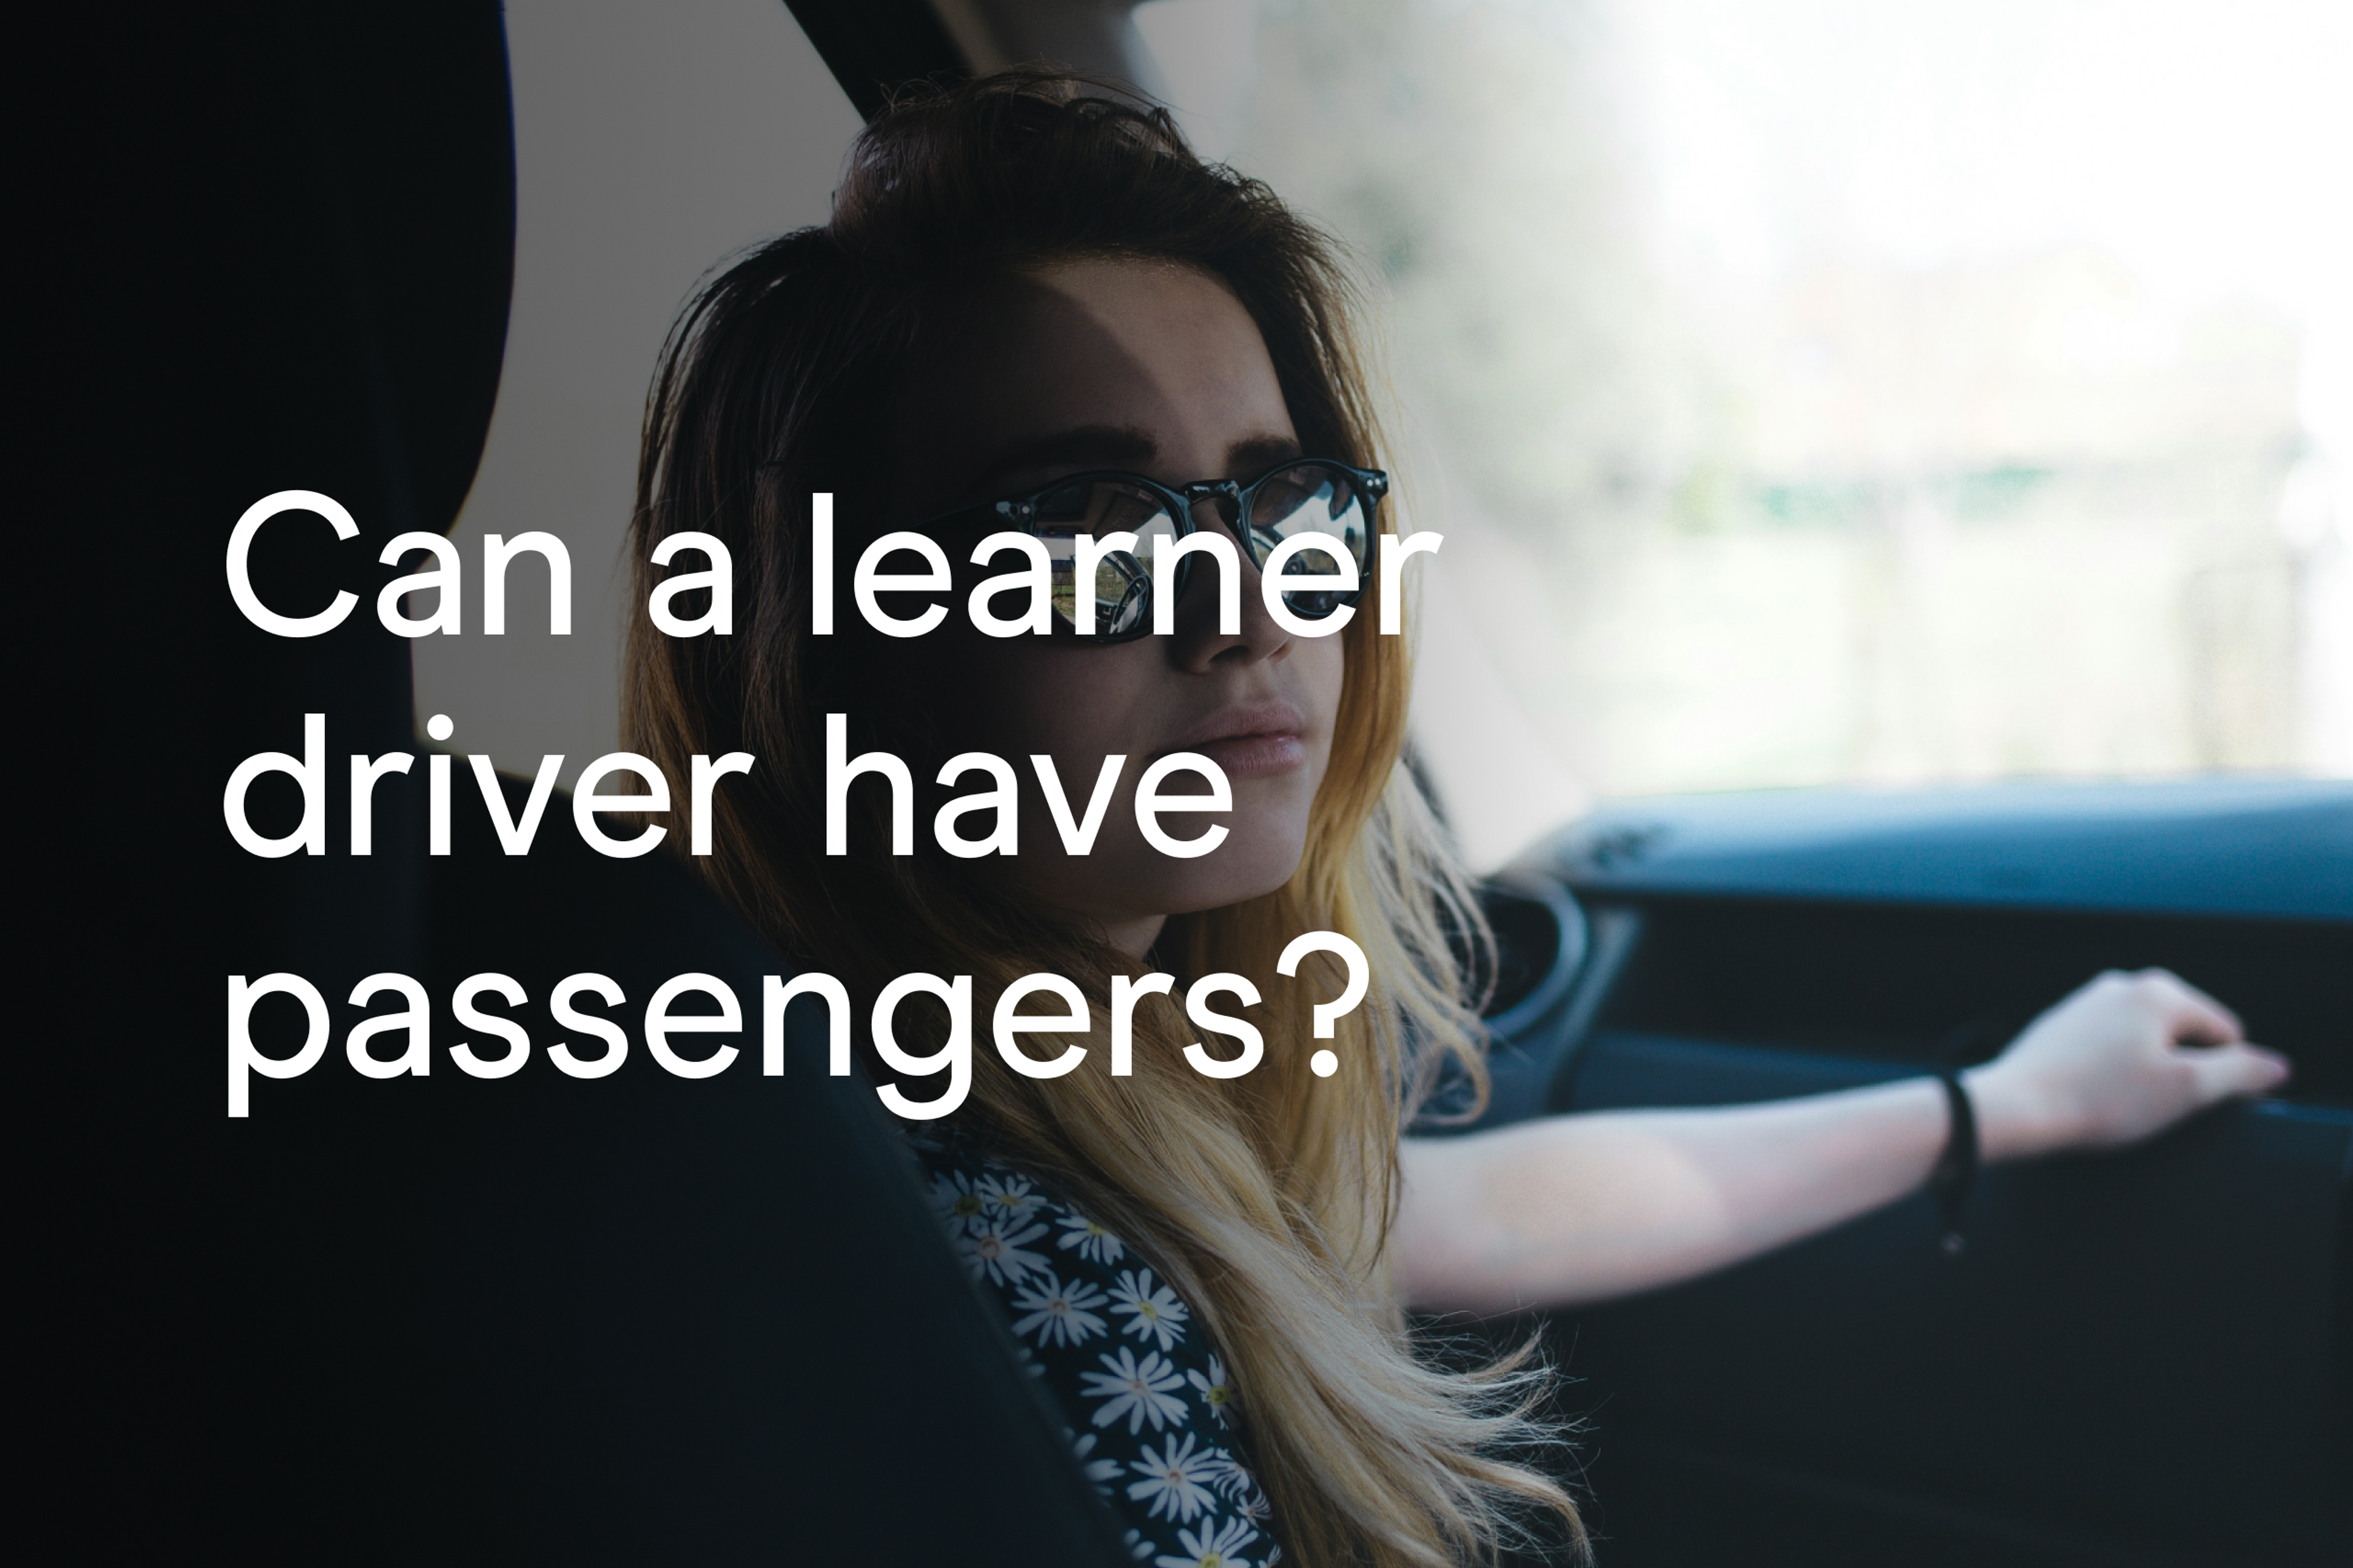 Can a learner driver have passengers?